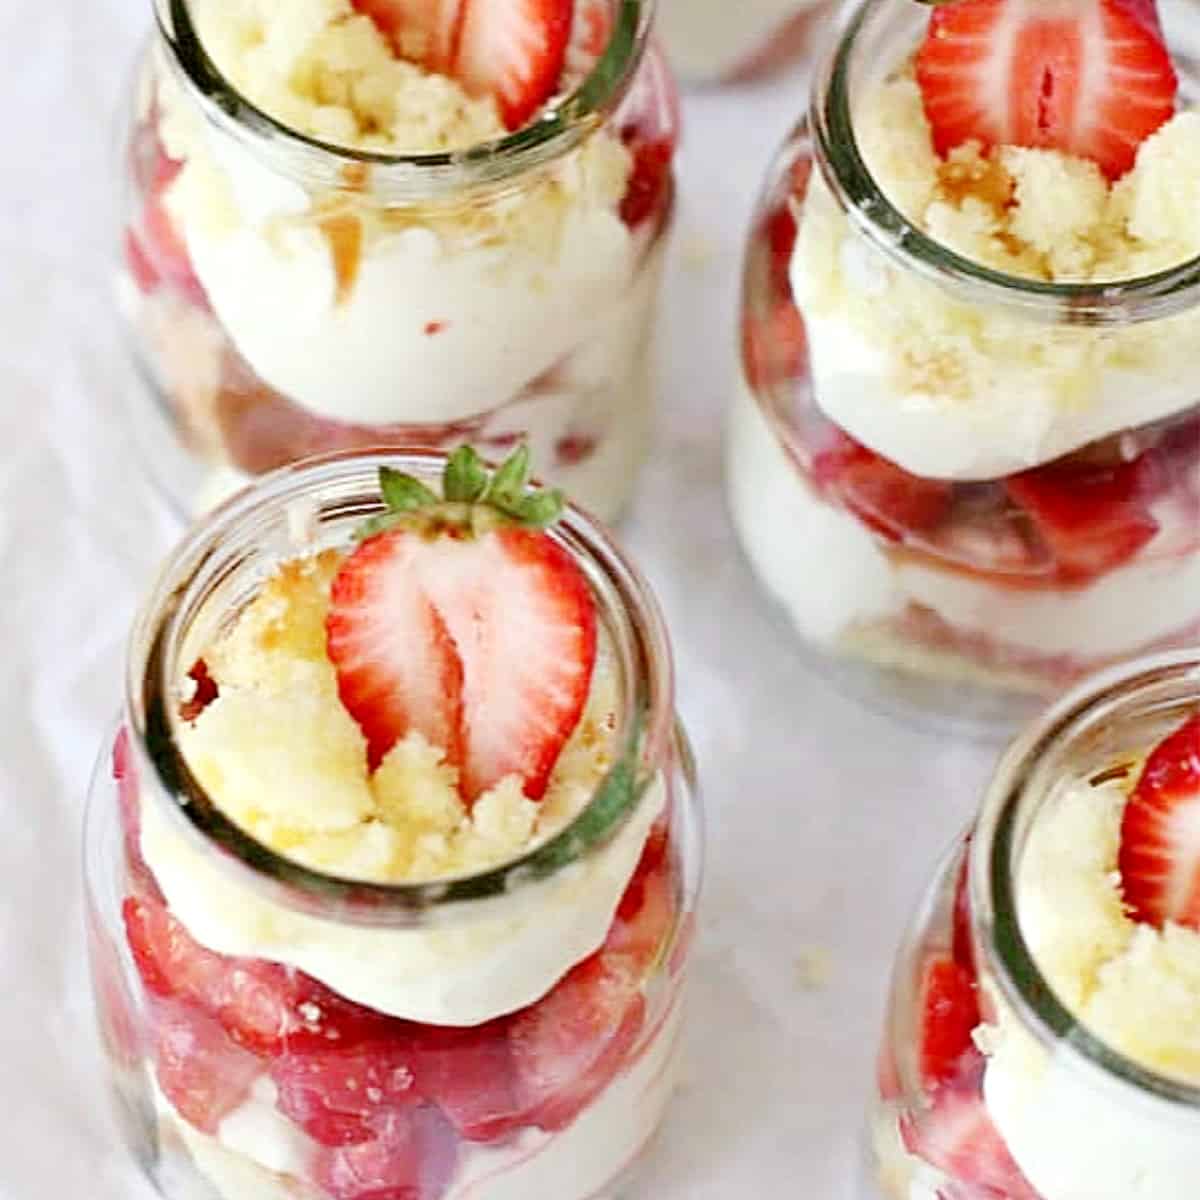 Overview of glass jars with strawberries and cream dessert, white surface